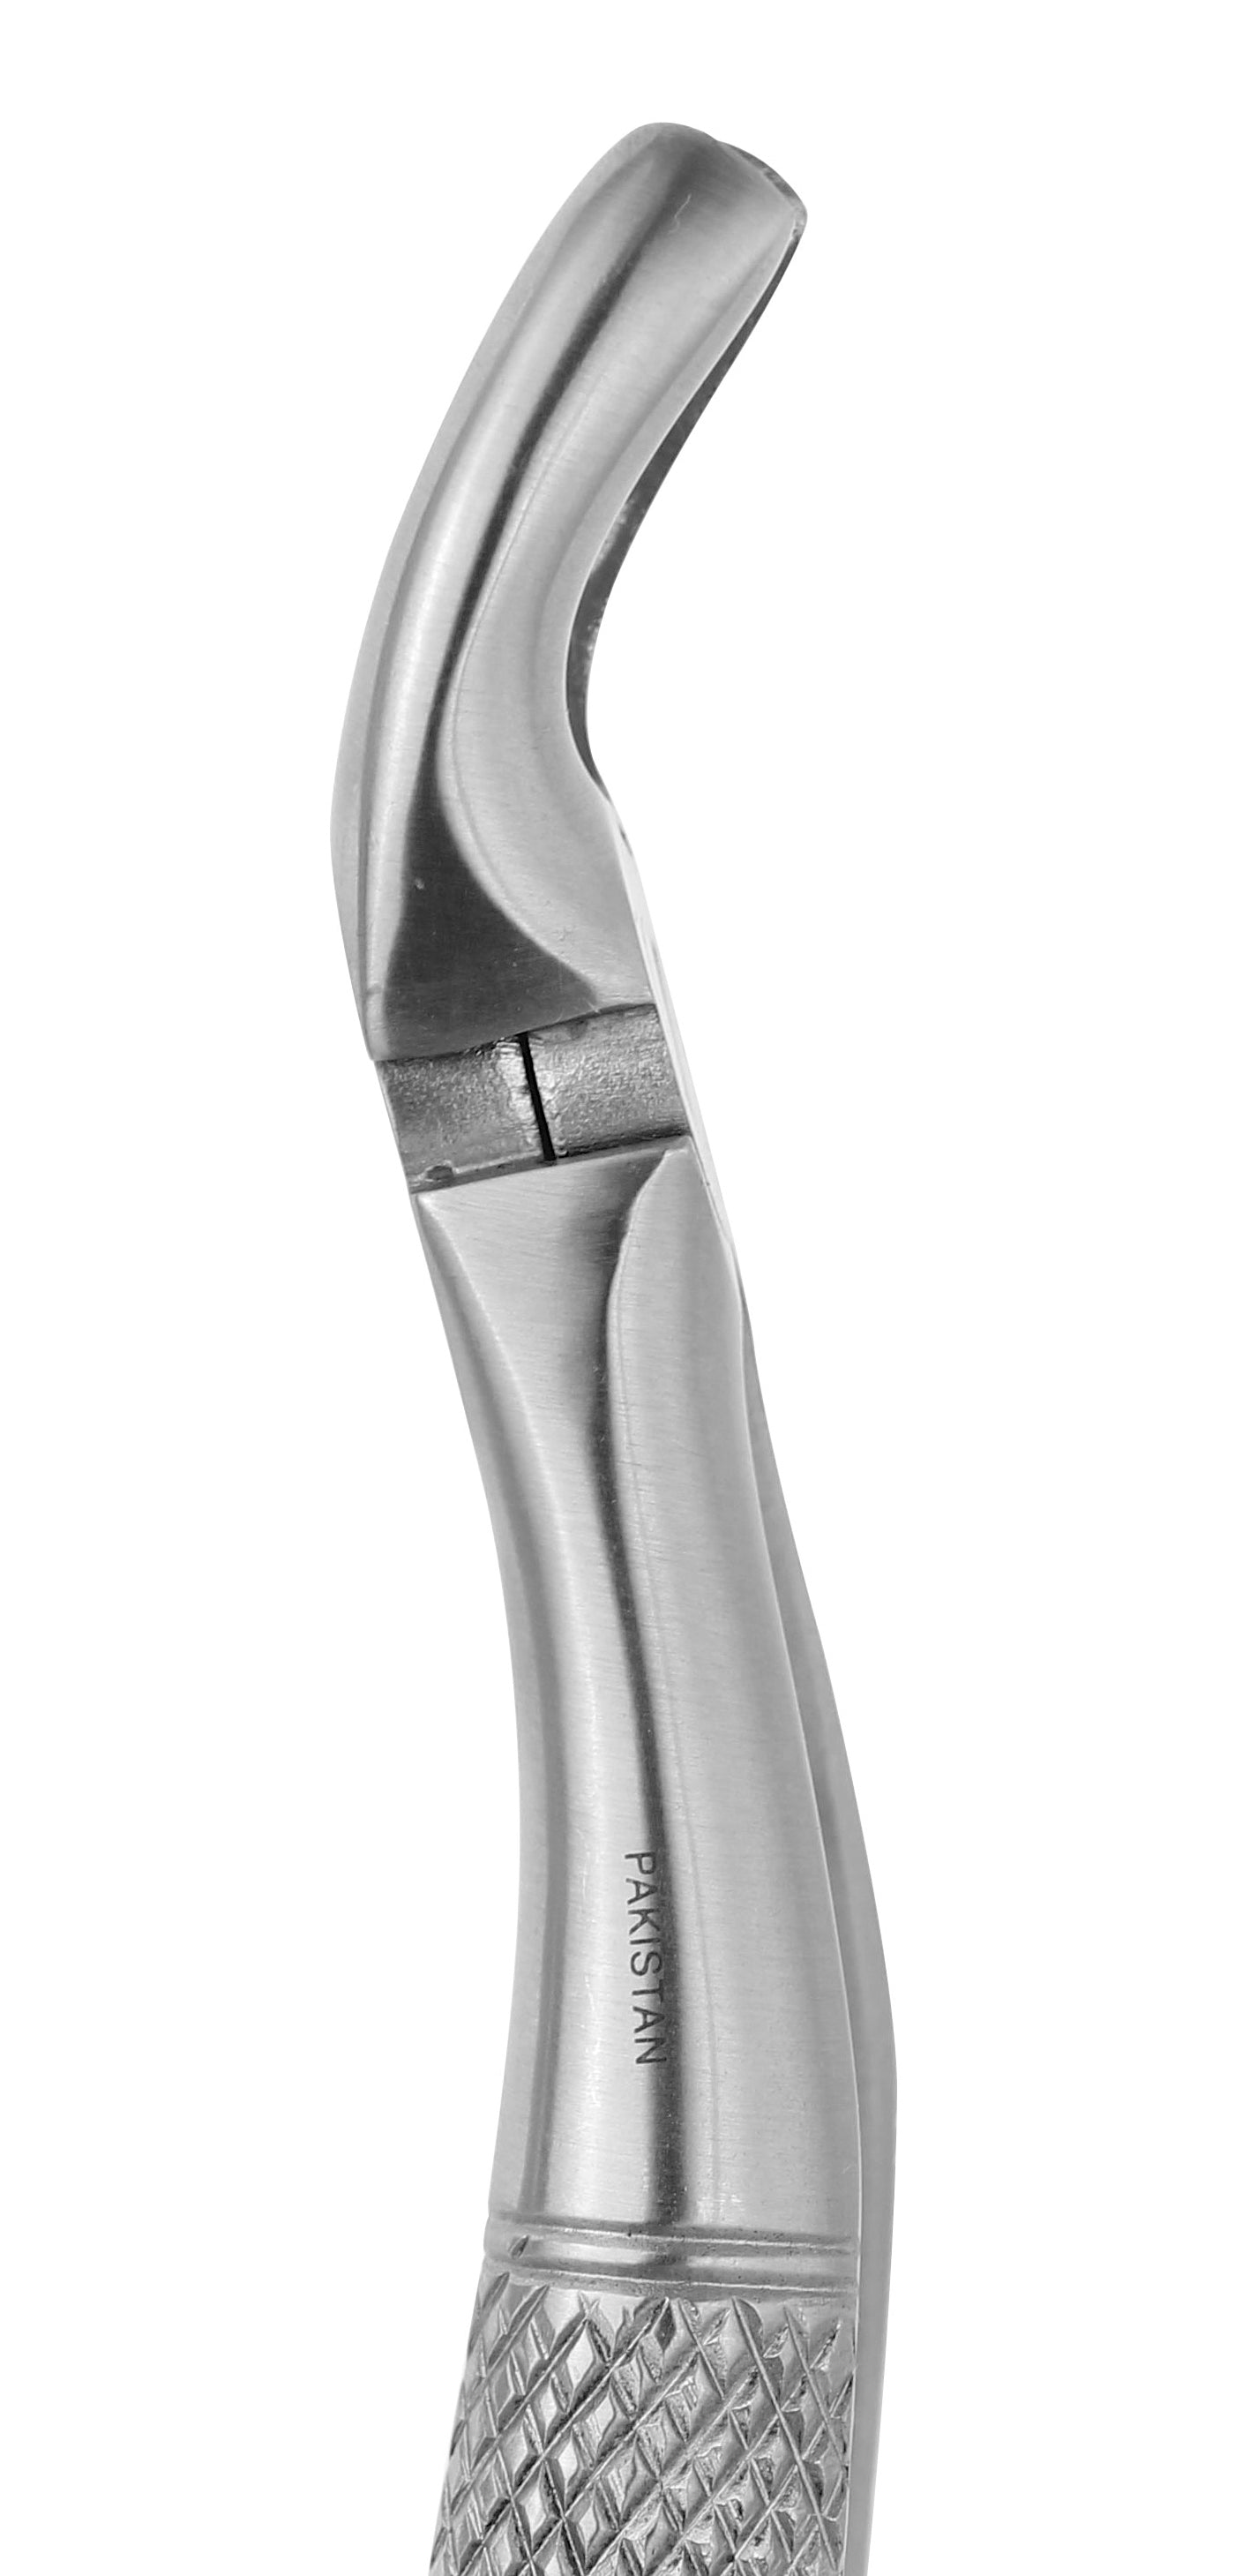 Extraction Forceps 019E